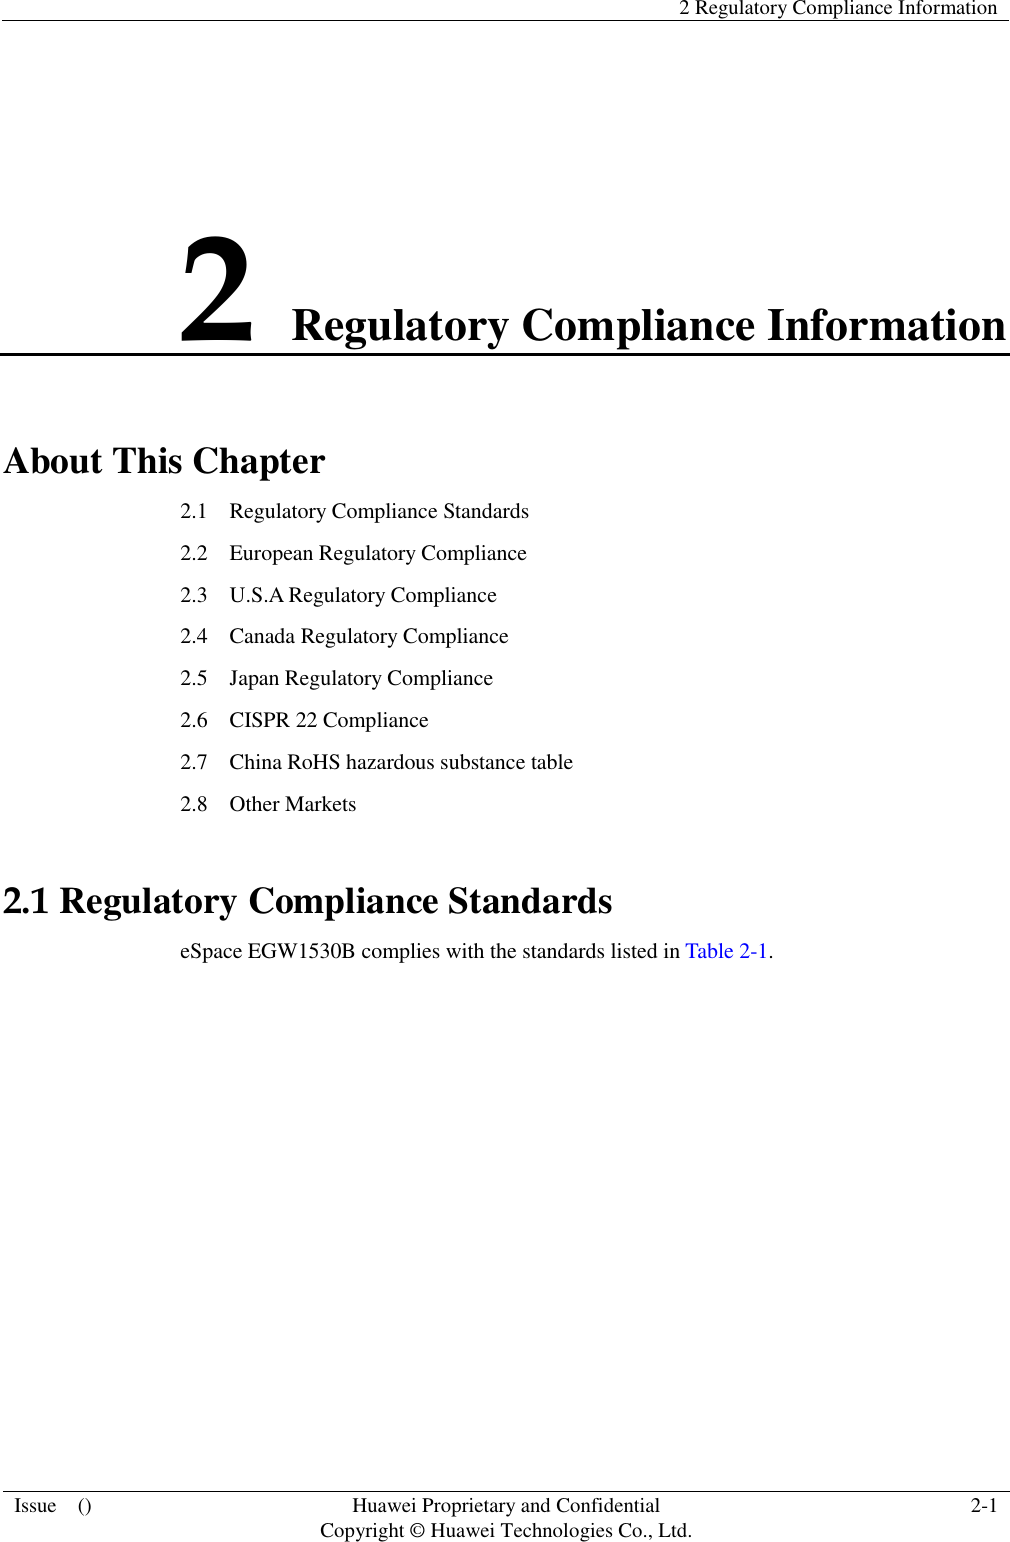   2 Regulatory Compliance Information  Issue    () Huawei Proprietary and Confidential                                     Copyright © Huawei Technologies Co., Ltd. 2-1  2 Regulatory Compliance Information About This Chapter 2.1    Regulatory Compliance Standards 2.2    European Regulatory Compliance 2.3    U.S.A Regulatory Compliance 2.4    Canada Regulatory Compliance 2.5  Japan Regulatory Compliance 2.6  CISPR 22 Compliance 2.7    China RoHS hazardous substance table 2.8    Other Markets 2.1 Regulatory Compliance Standards eSpace EGW1530B complies with the standards listed in Table 2-1. 